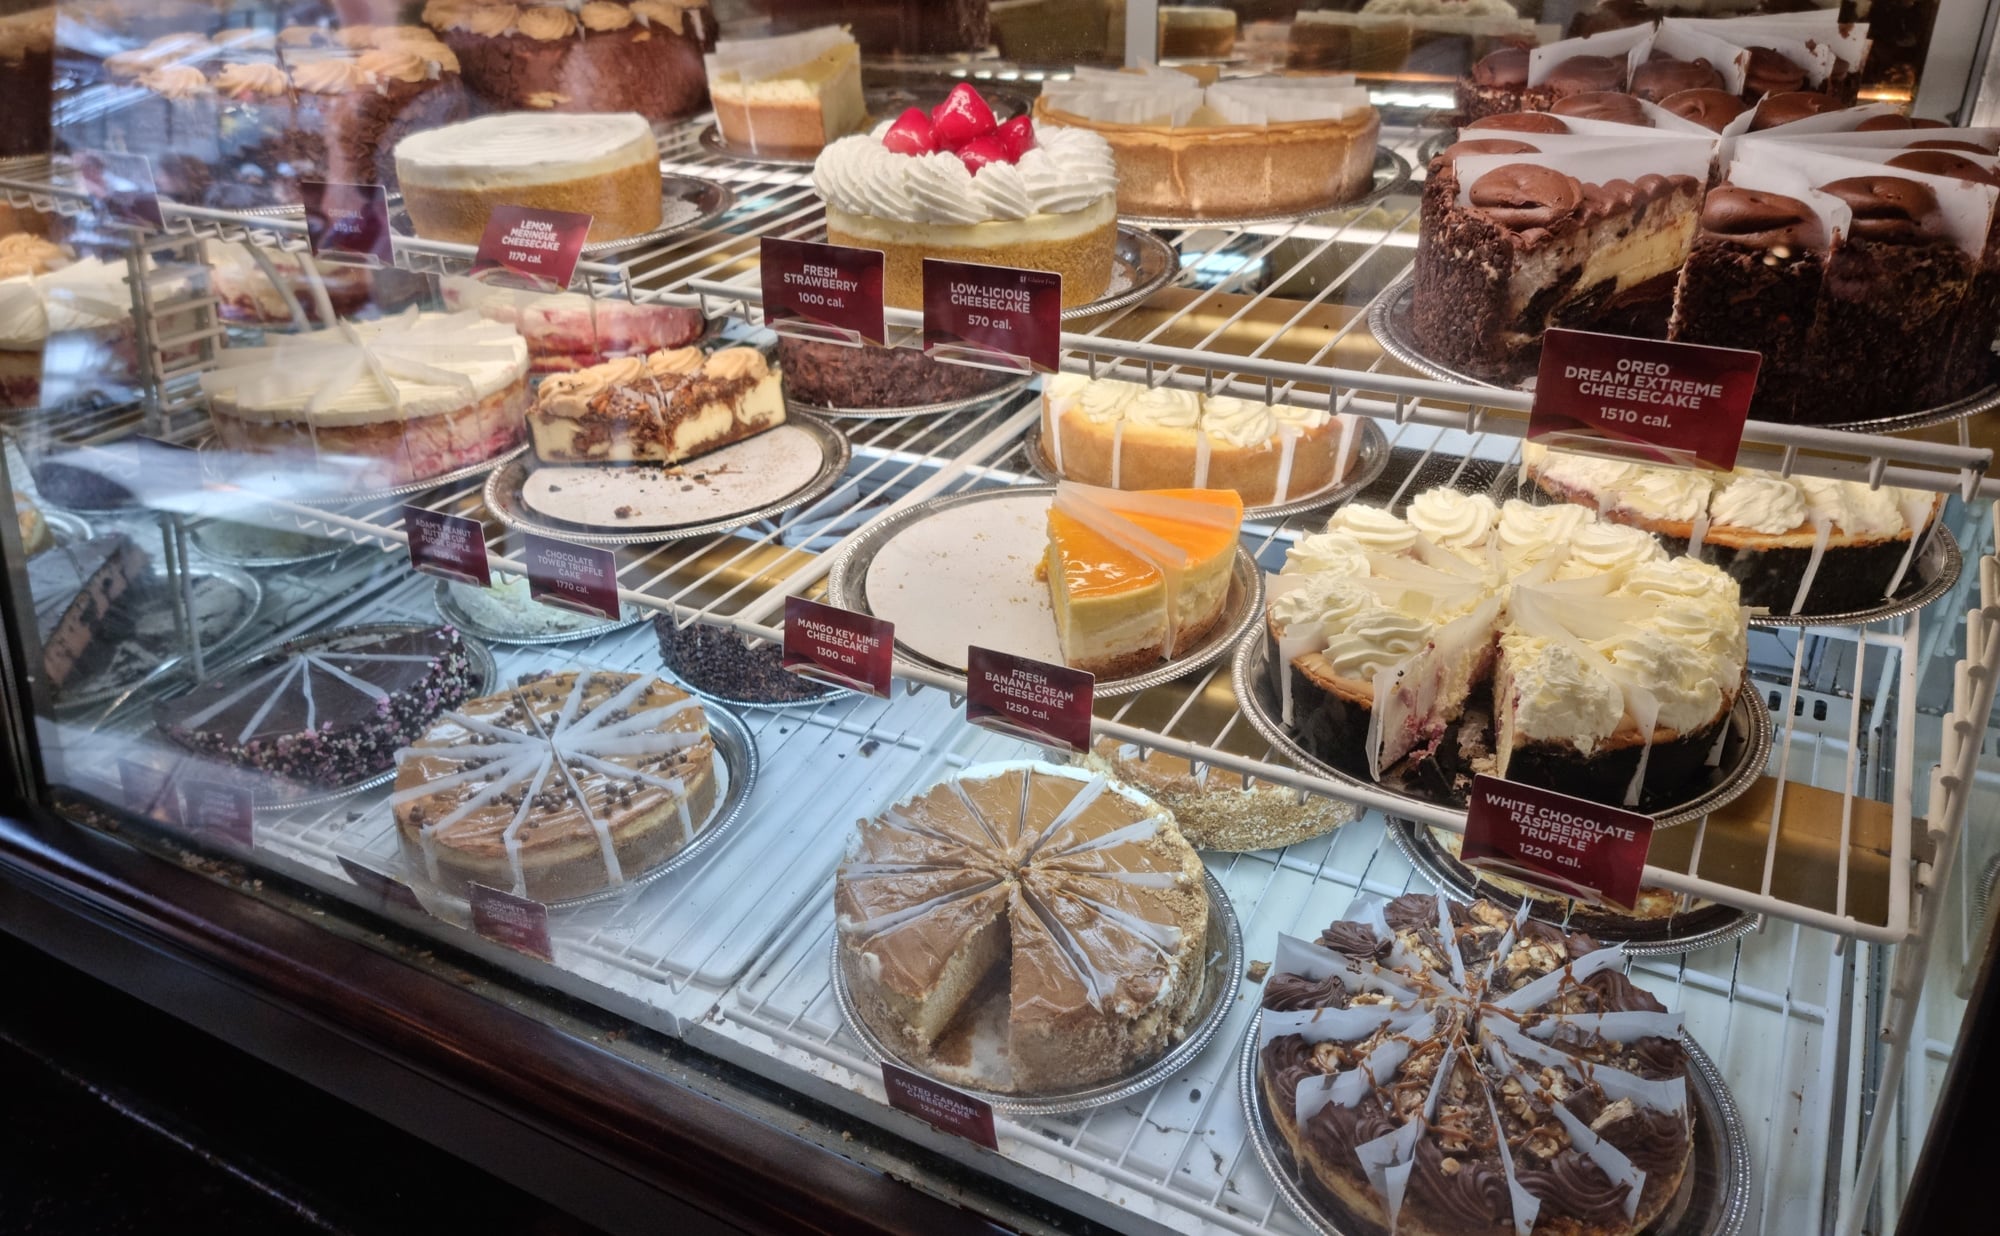 A display of cakes and pastries in a glass case.